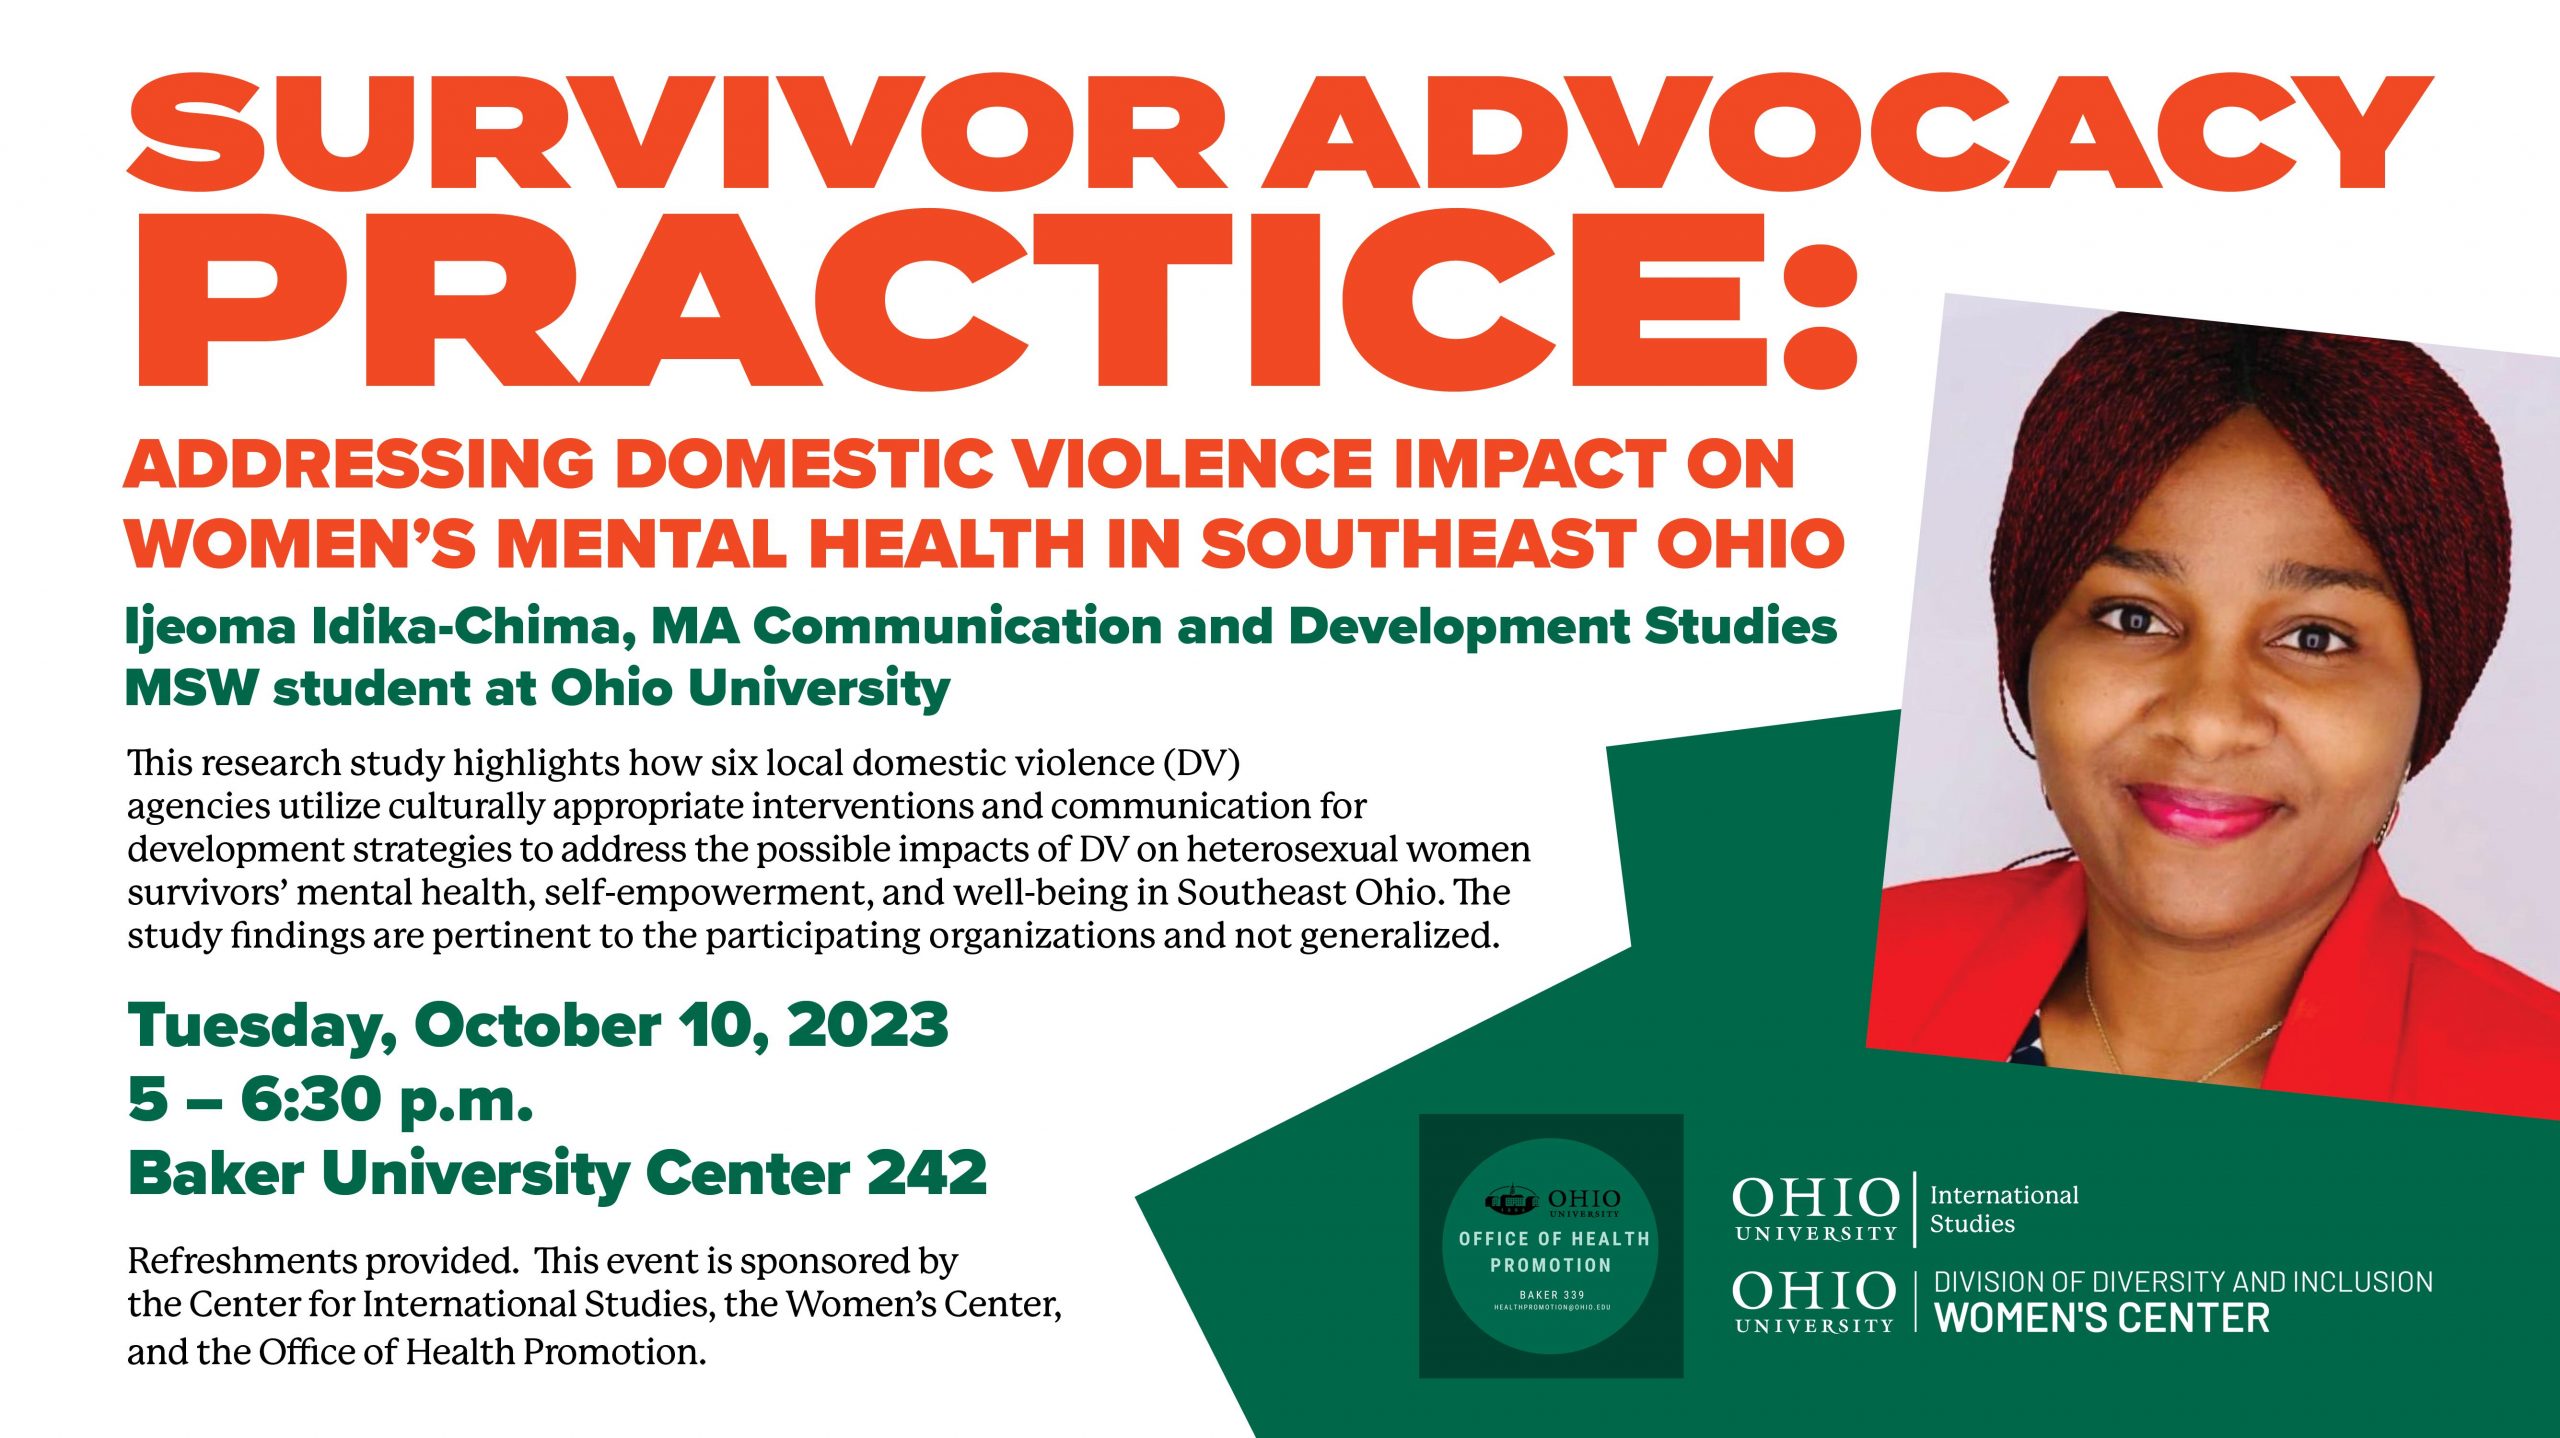 A flyer for a Survival Advocacy practice event